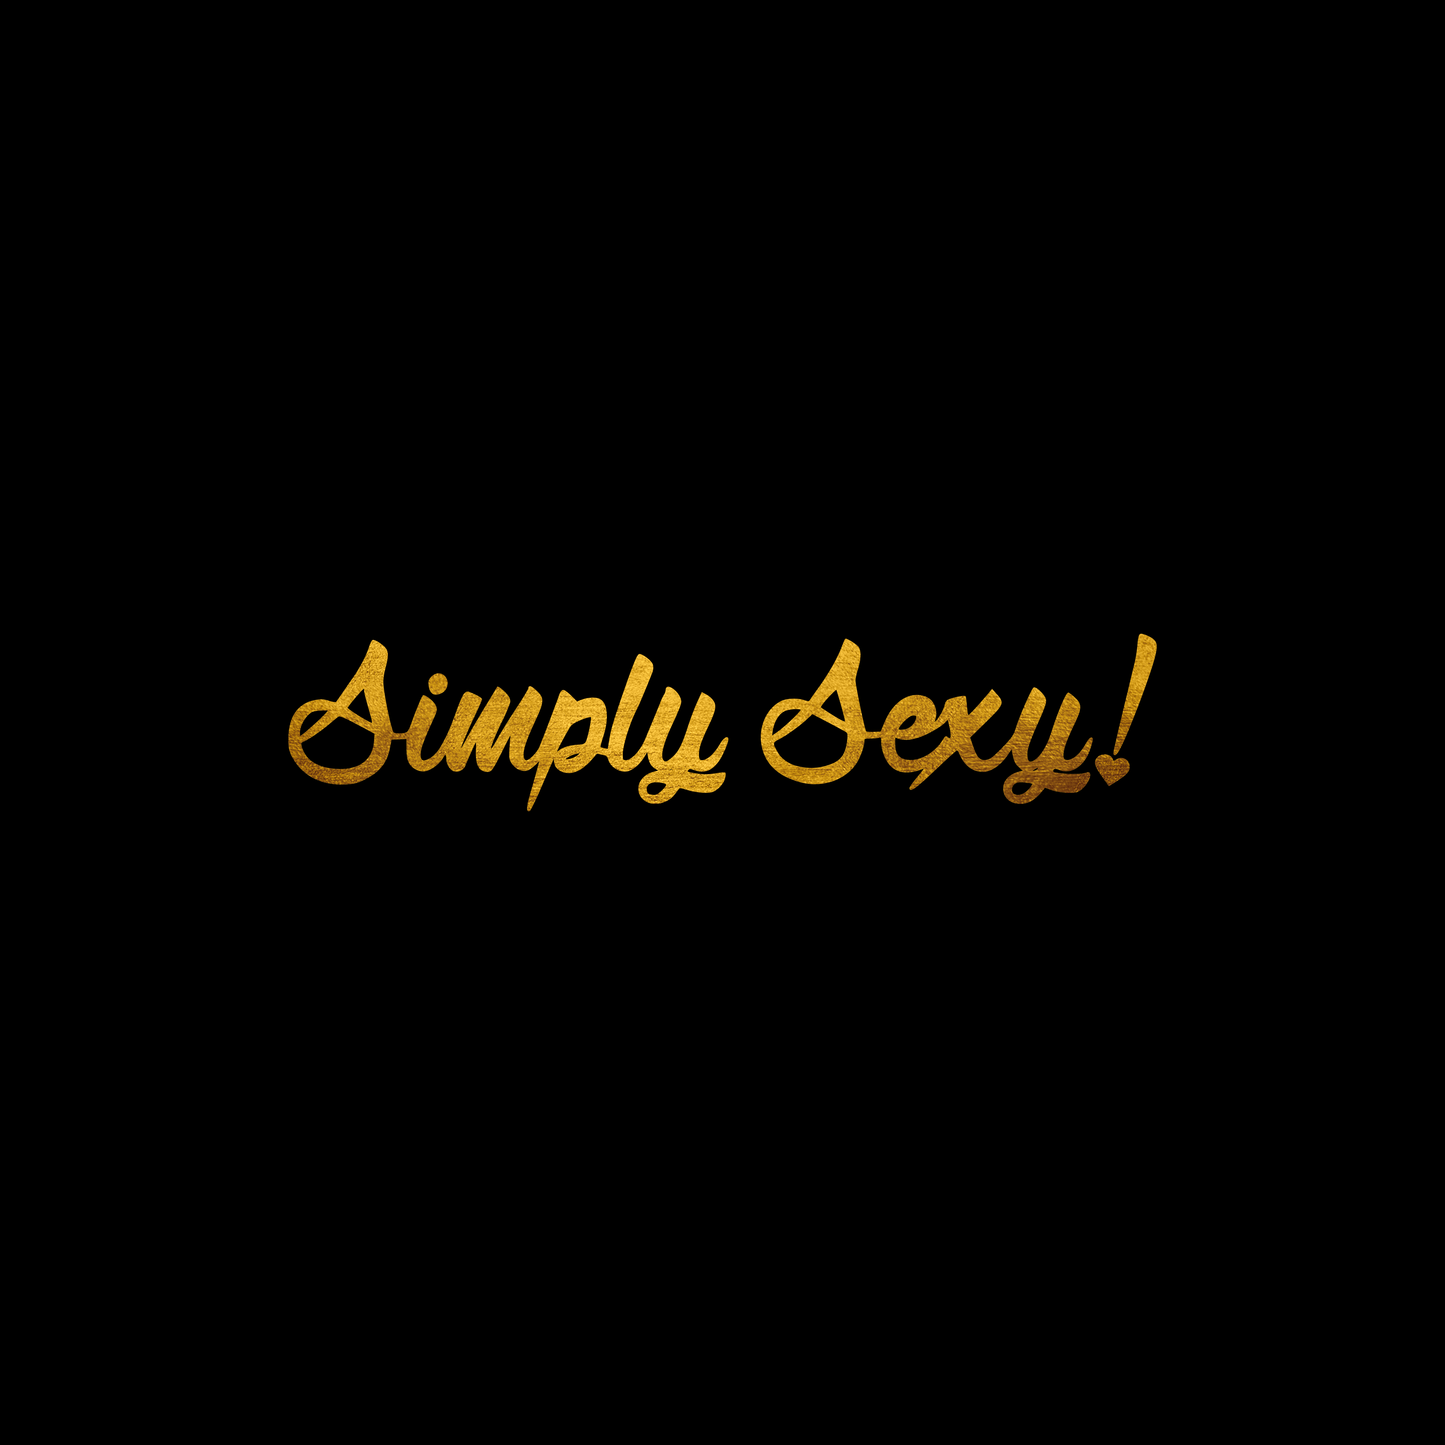 Simply sexy sticker decal